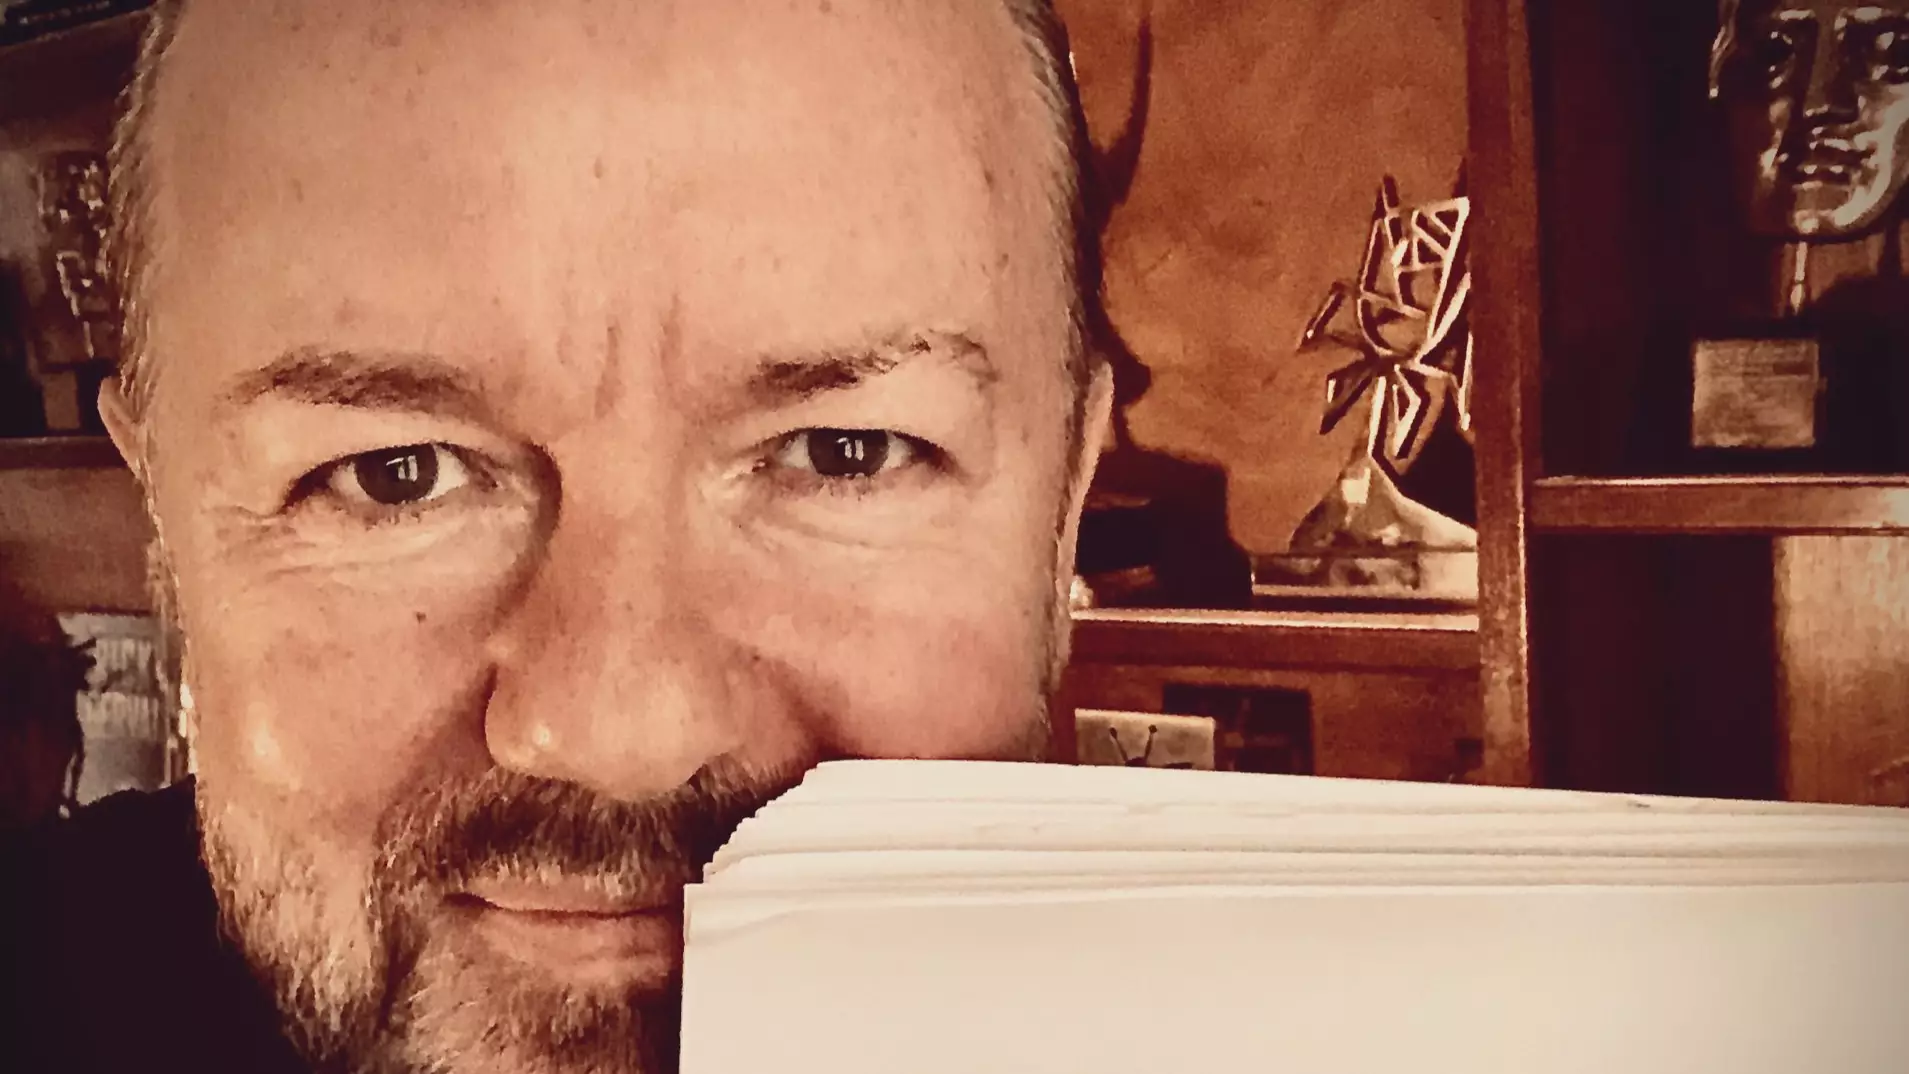 Ricky Gervais Has Finished Second Draft Of After Life Season 3 Script